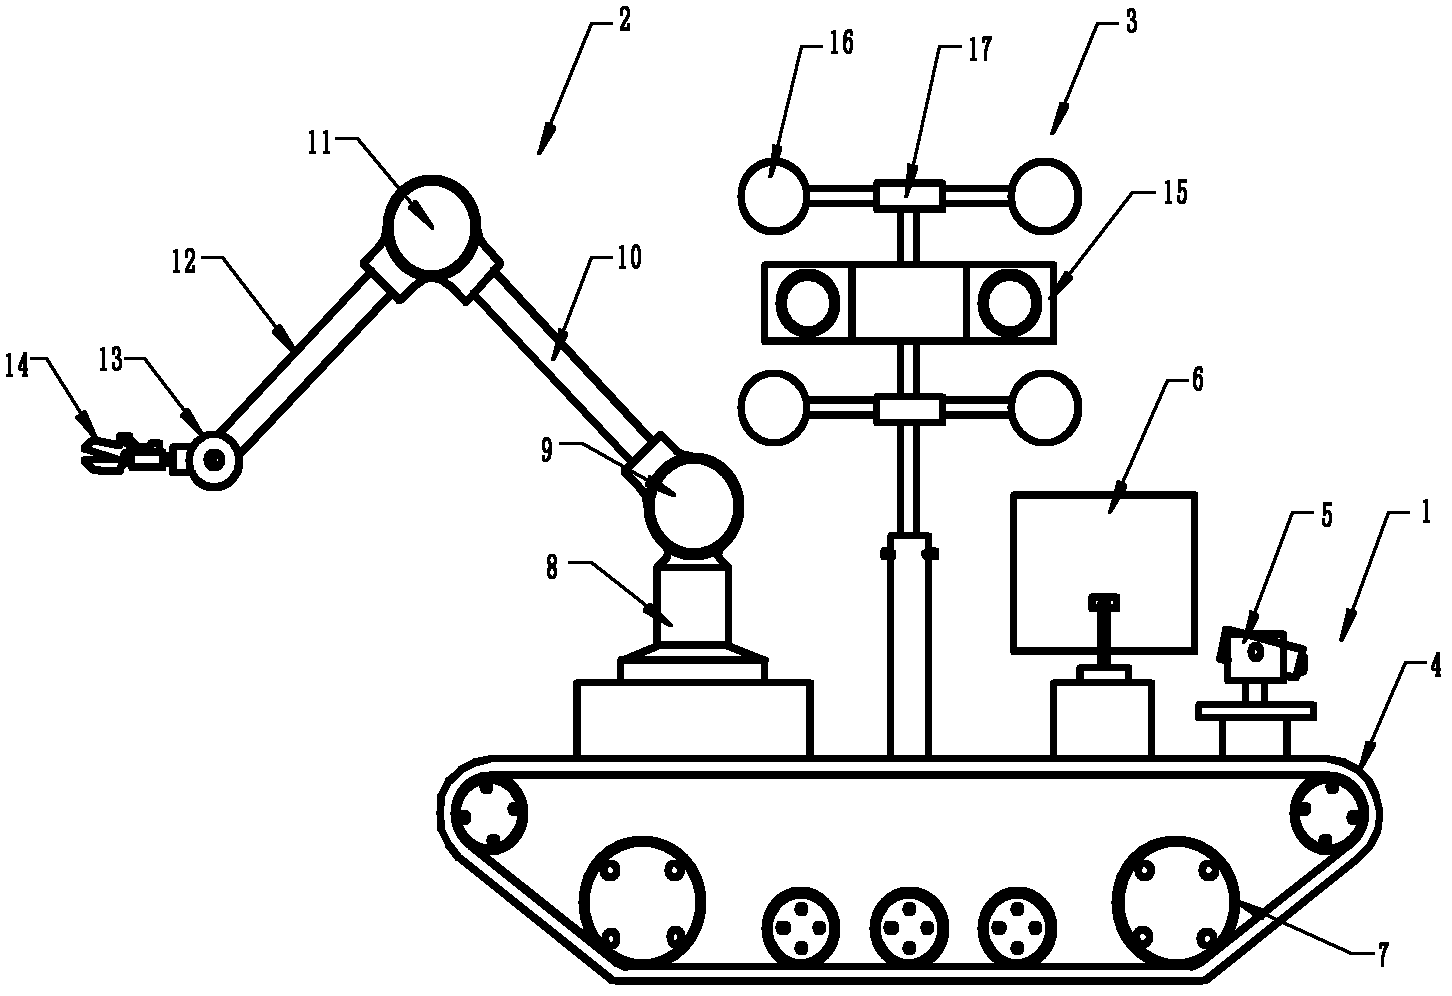 Pruning robot system for grape vines